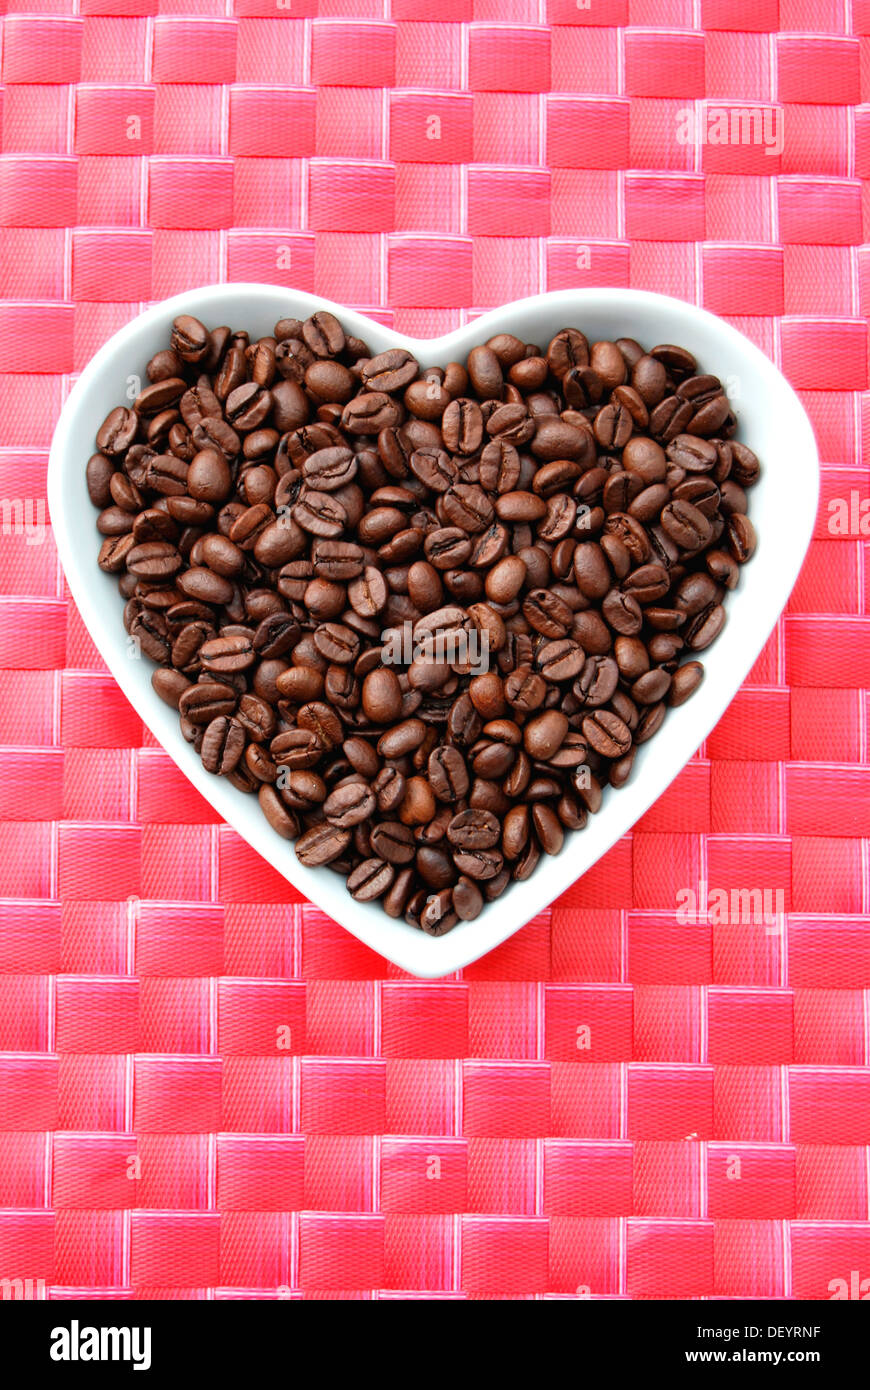 Coffee beans in a heart-shaped porcelain bowl Stock Photo